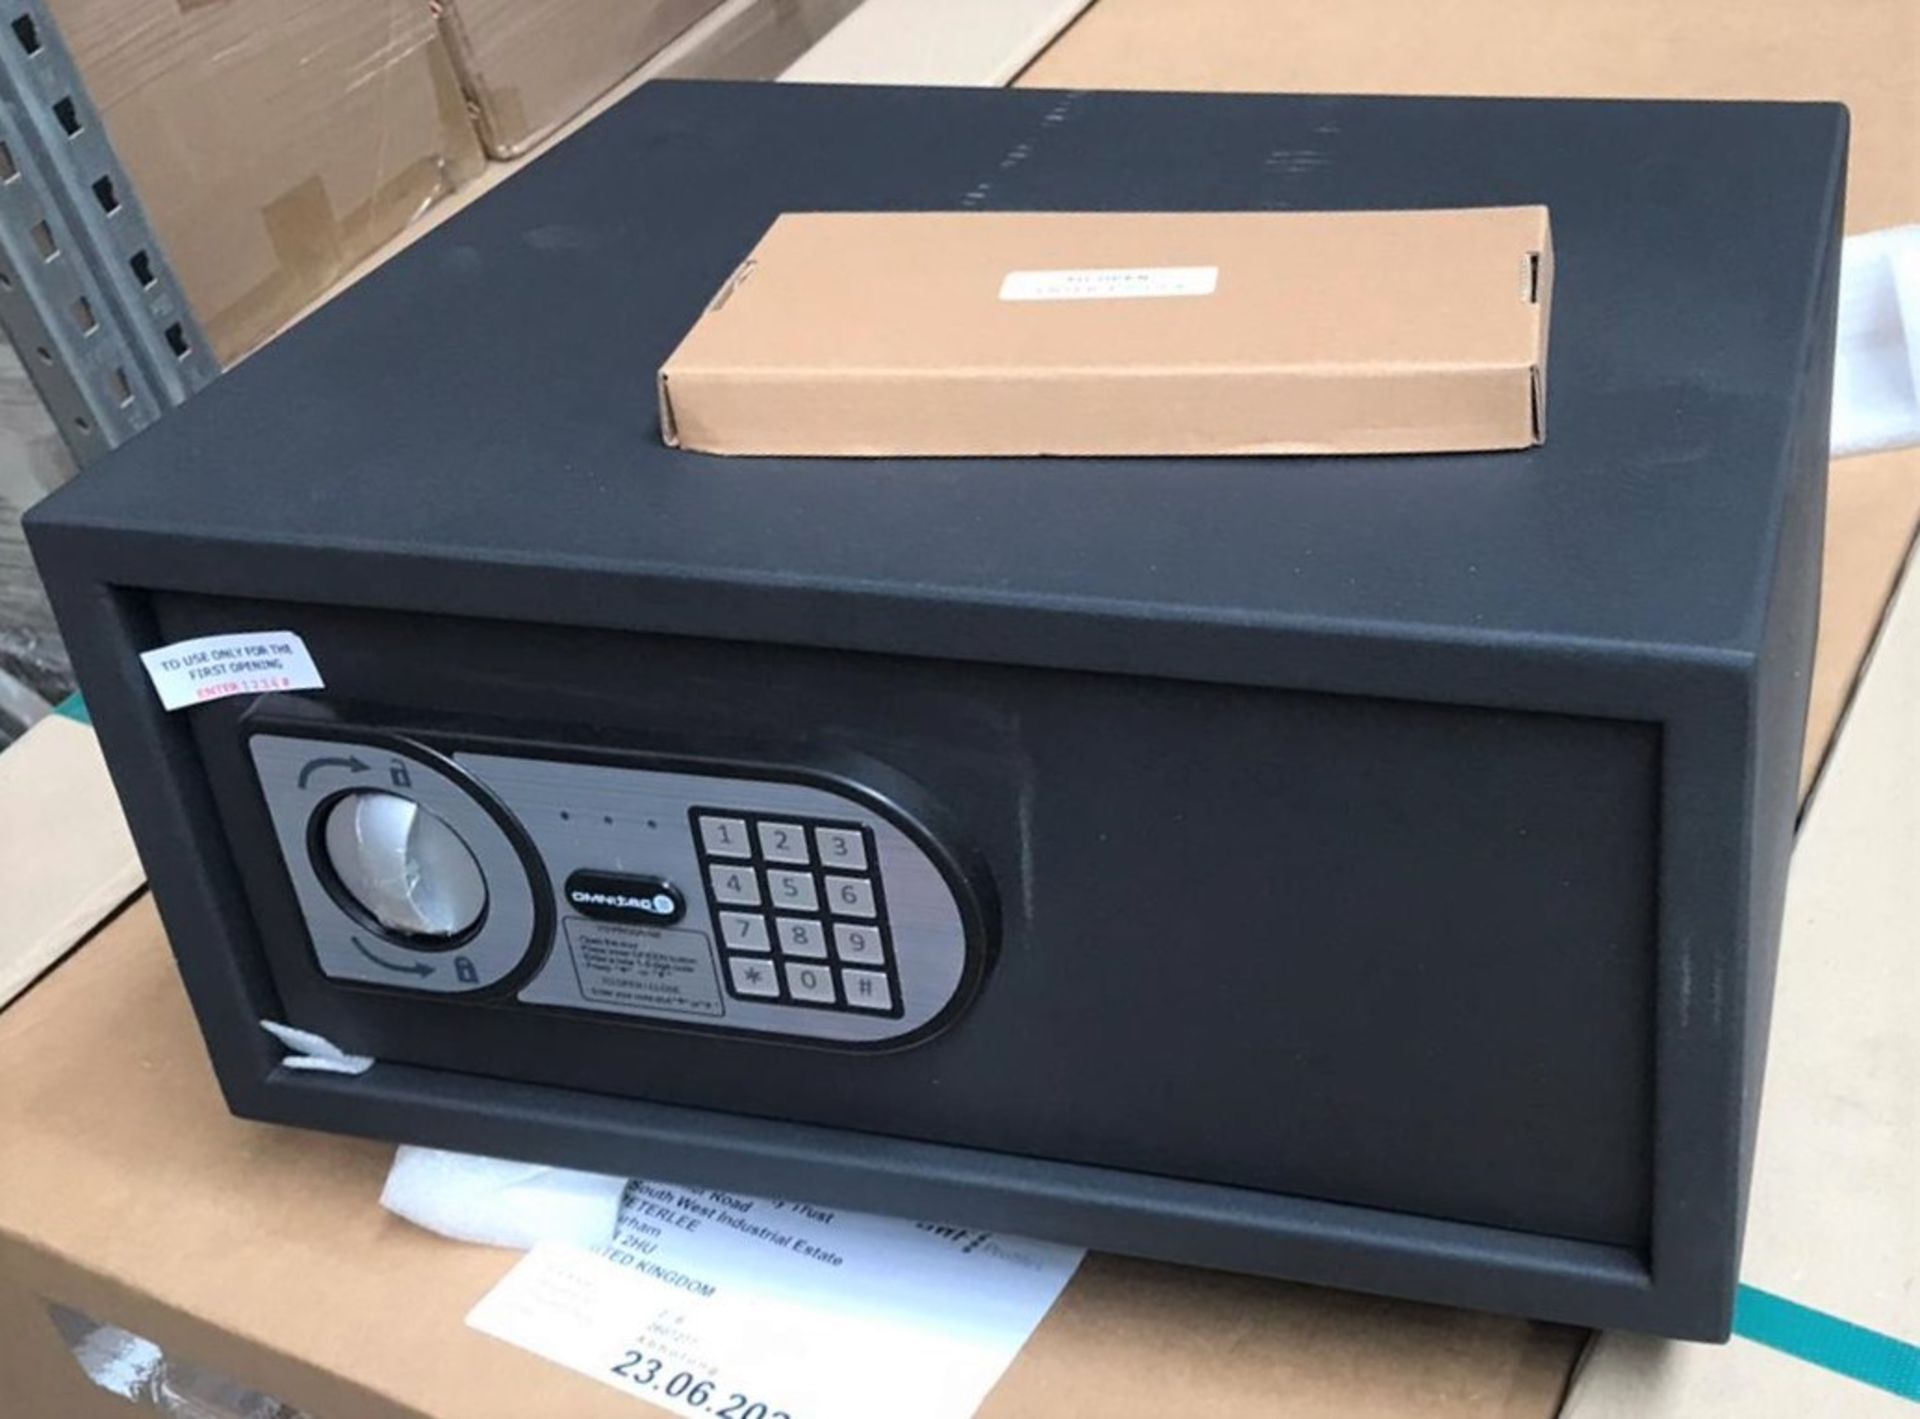 1 x Omnitec Safeguard Security Safe With Keypad Opening - Model Laptop 15 - Size H20 x W43 x D35 cms - Image 3 of 6